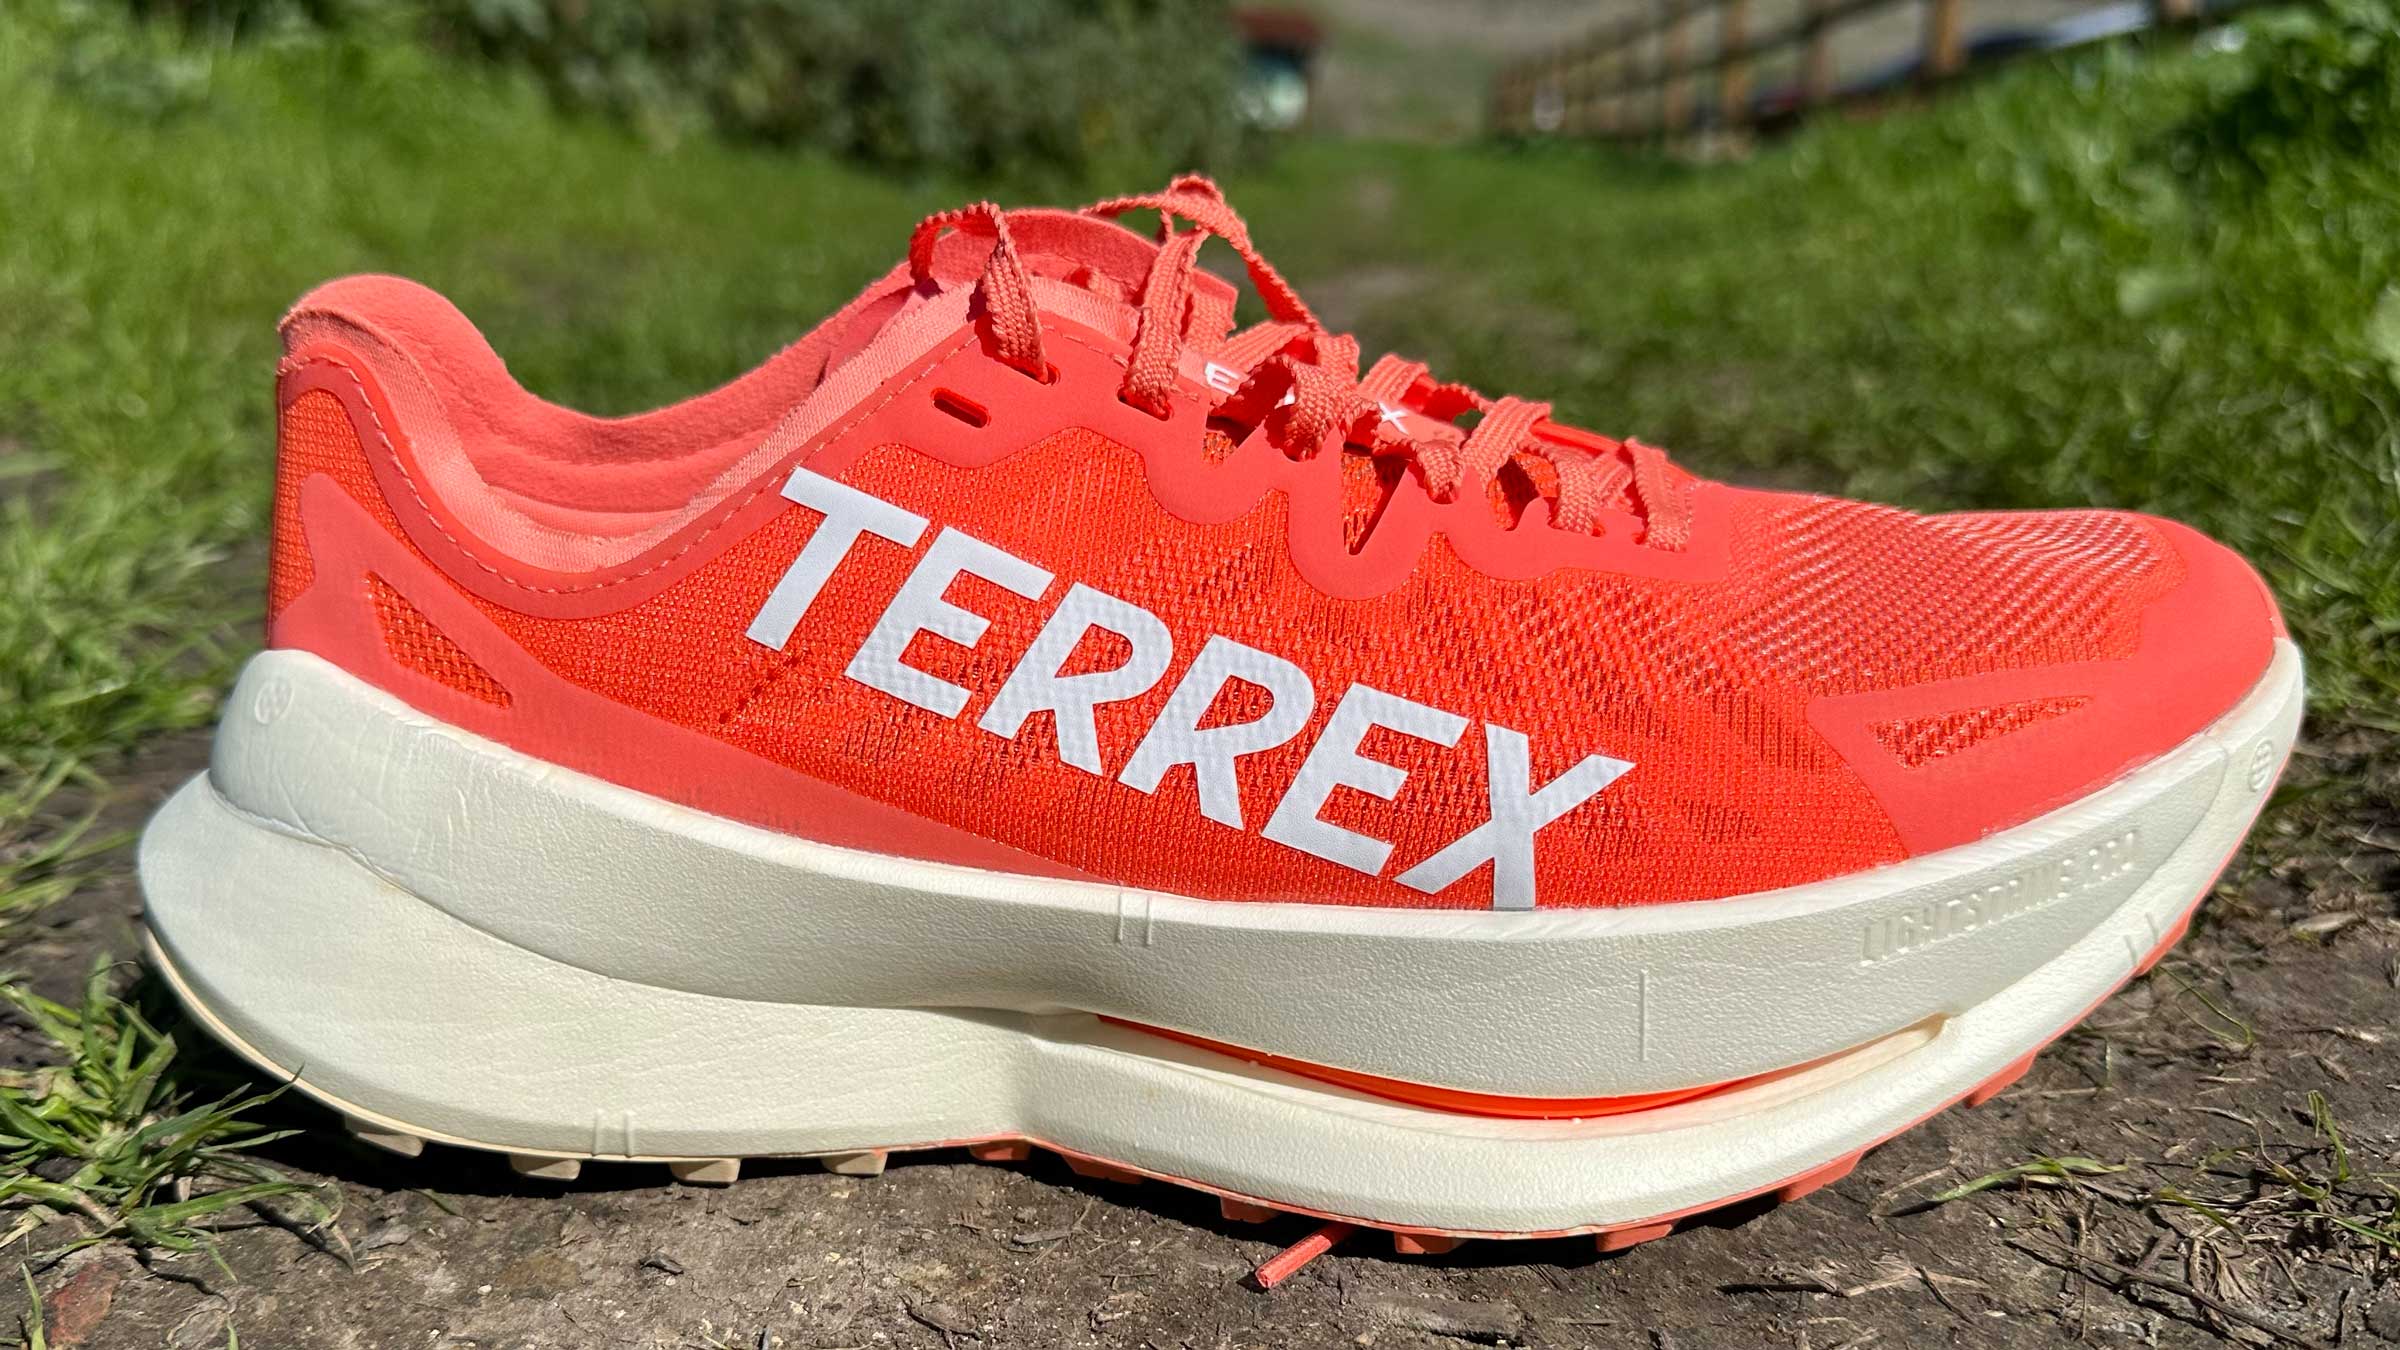 Adidas Terrex Agravic Speed Ultra Review: The Best Trail Supershoe